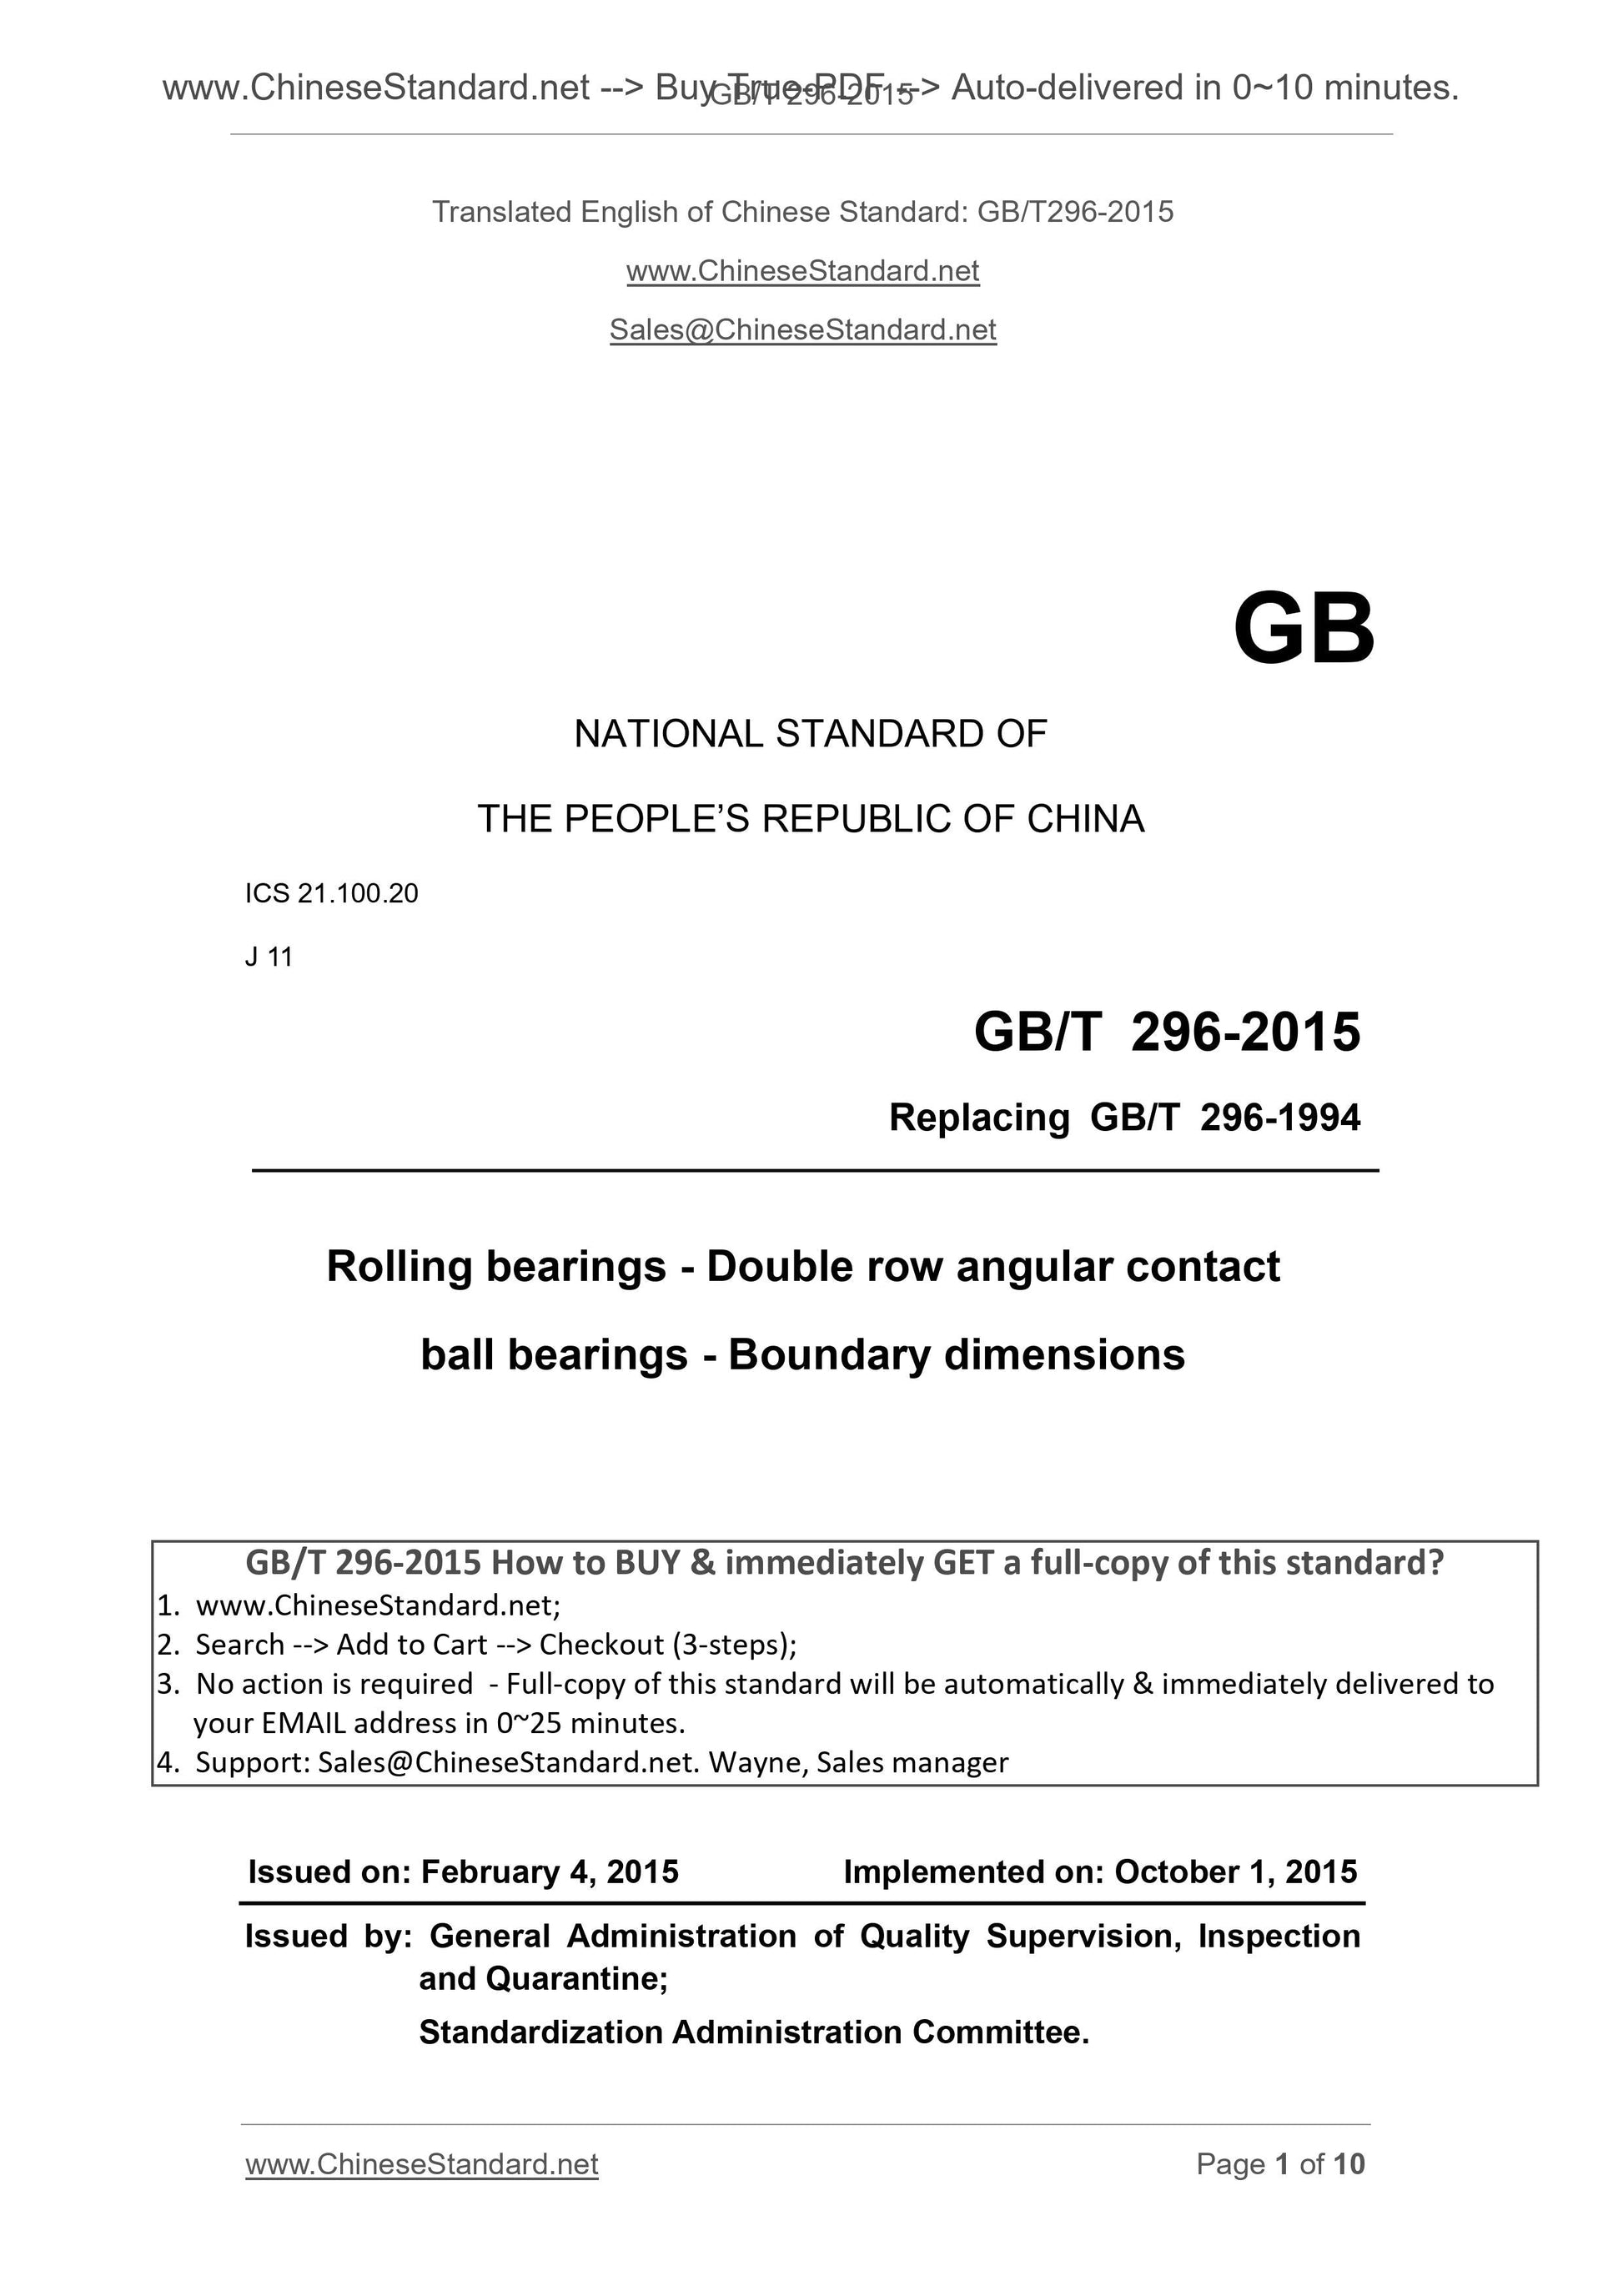 GB/T 296-2015 Page 1